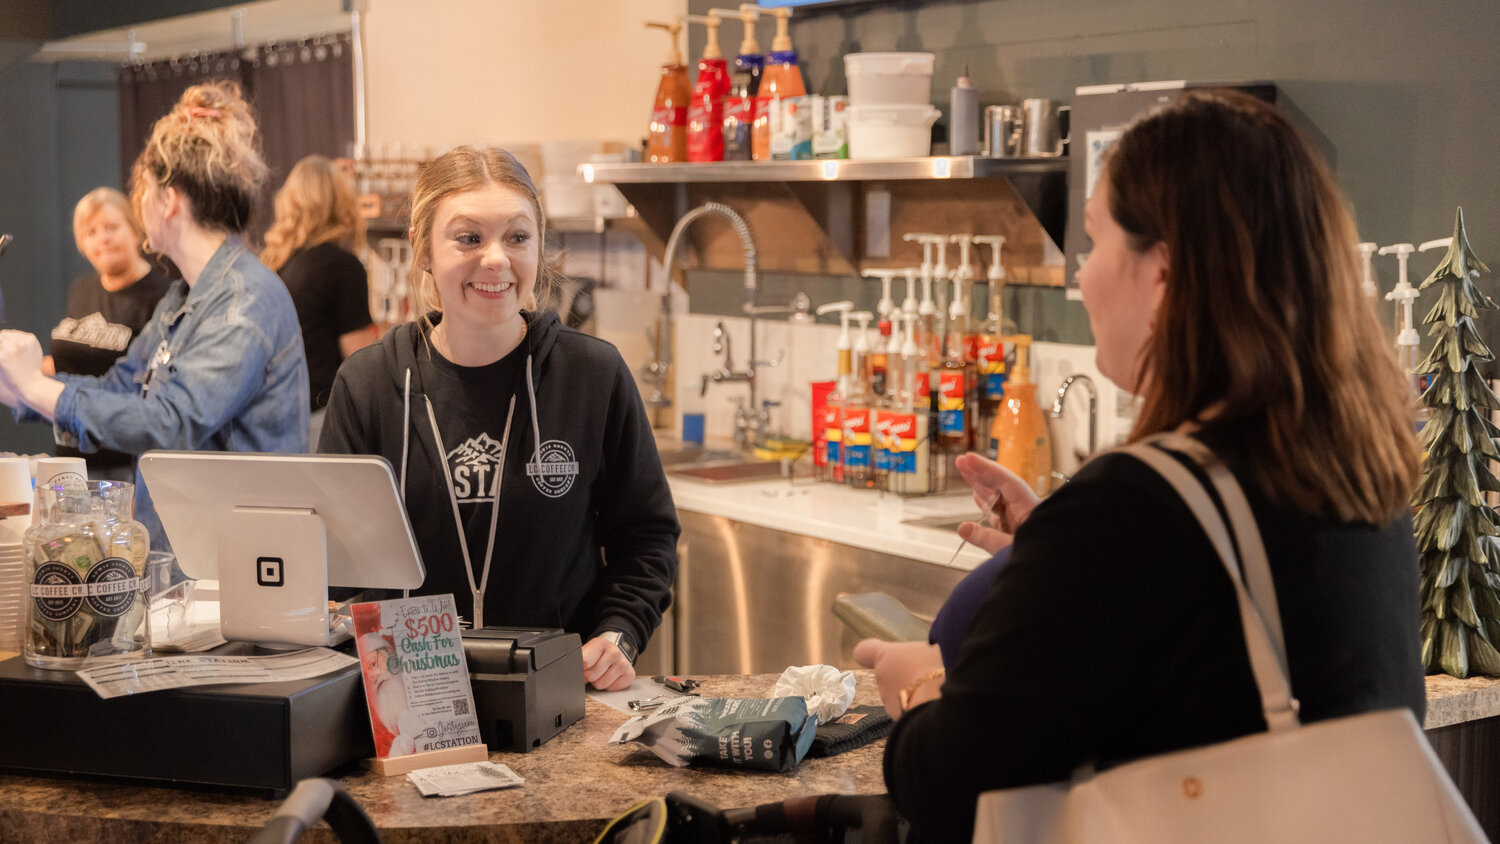 Employees smile as visitors order inside The Station powered by Lewis County Coffee Company in downtown Centralia on Friday, Nov. 17.